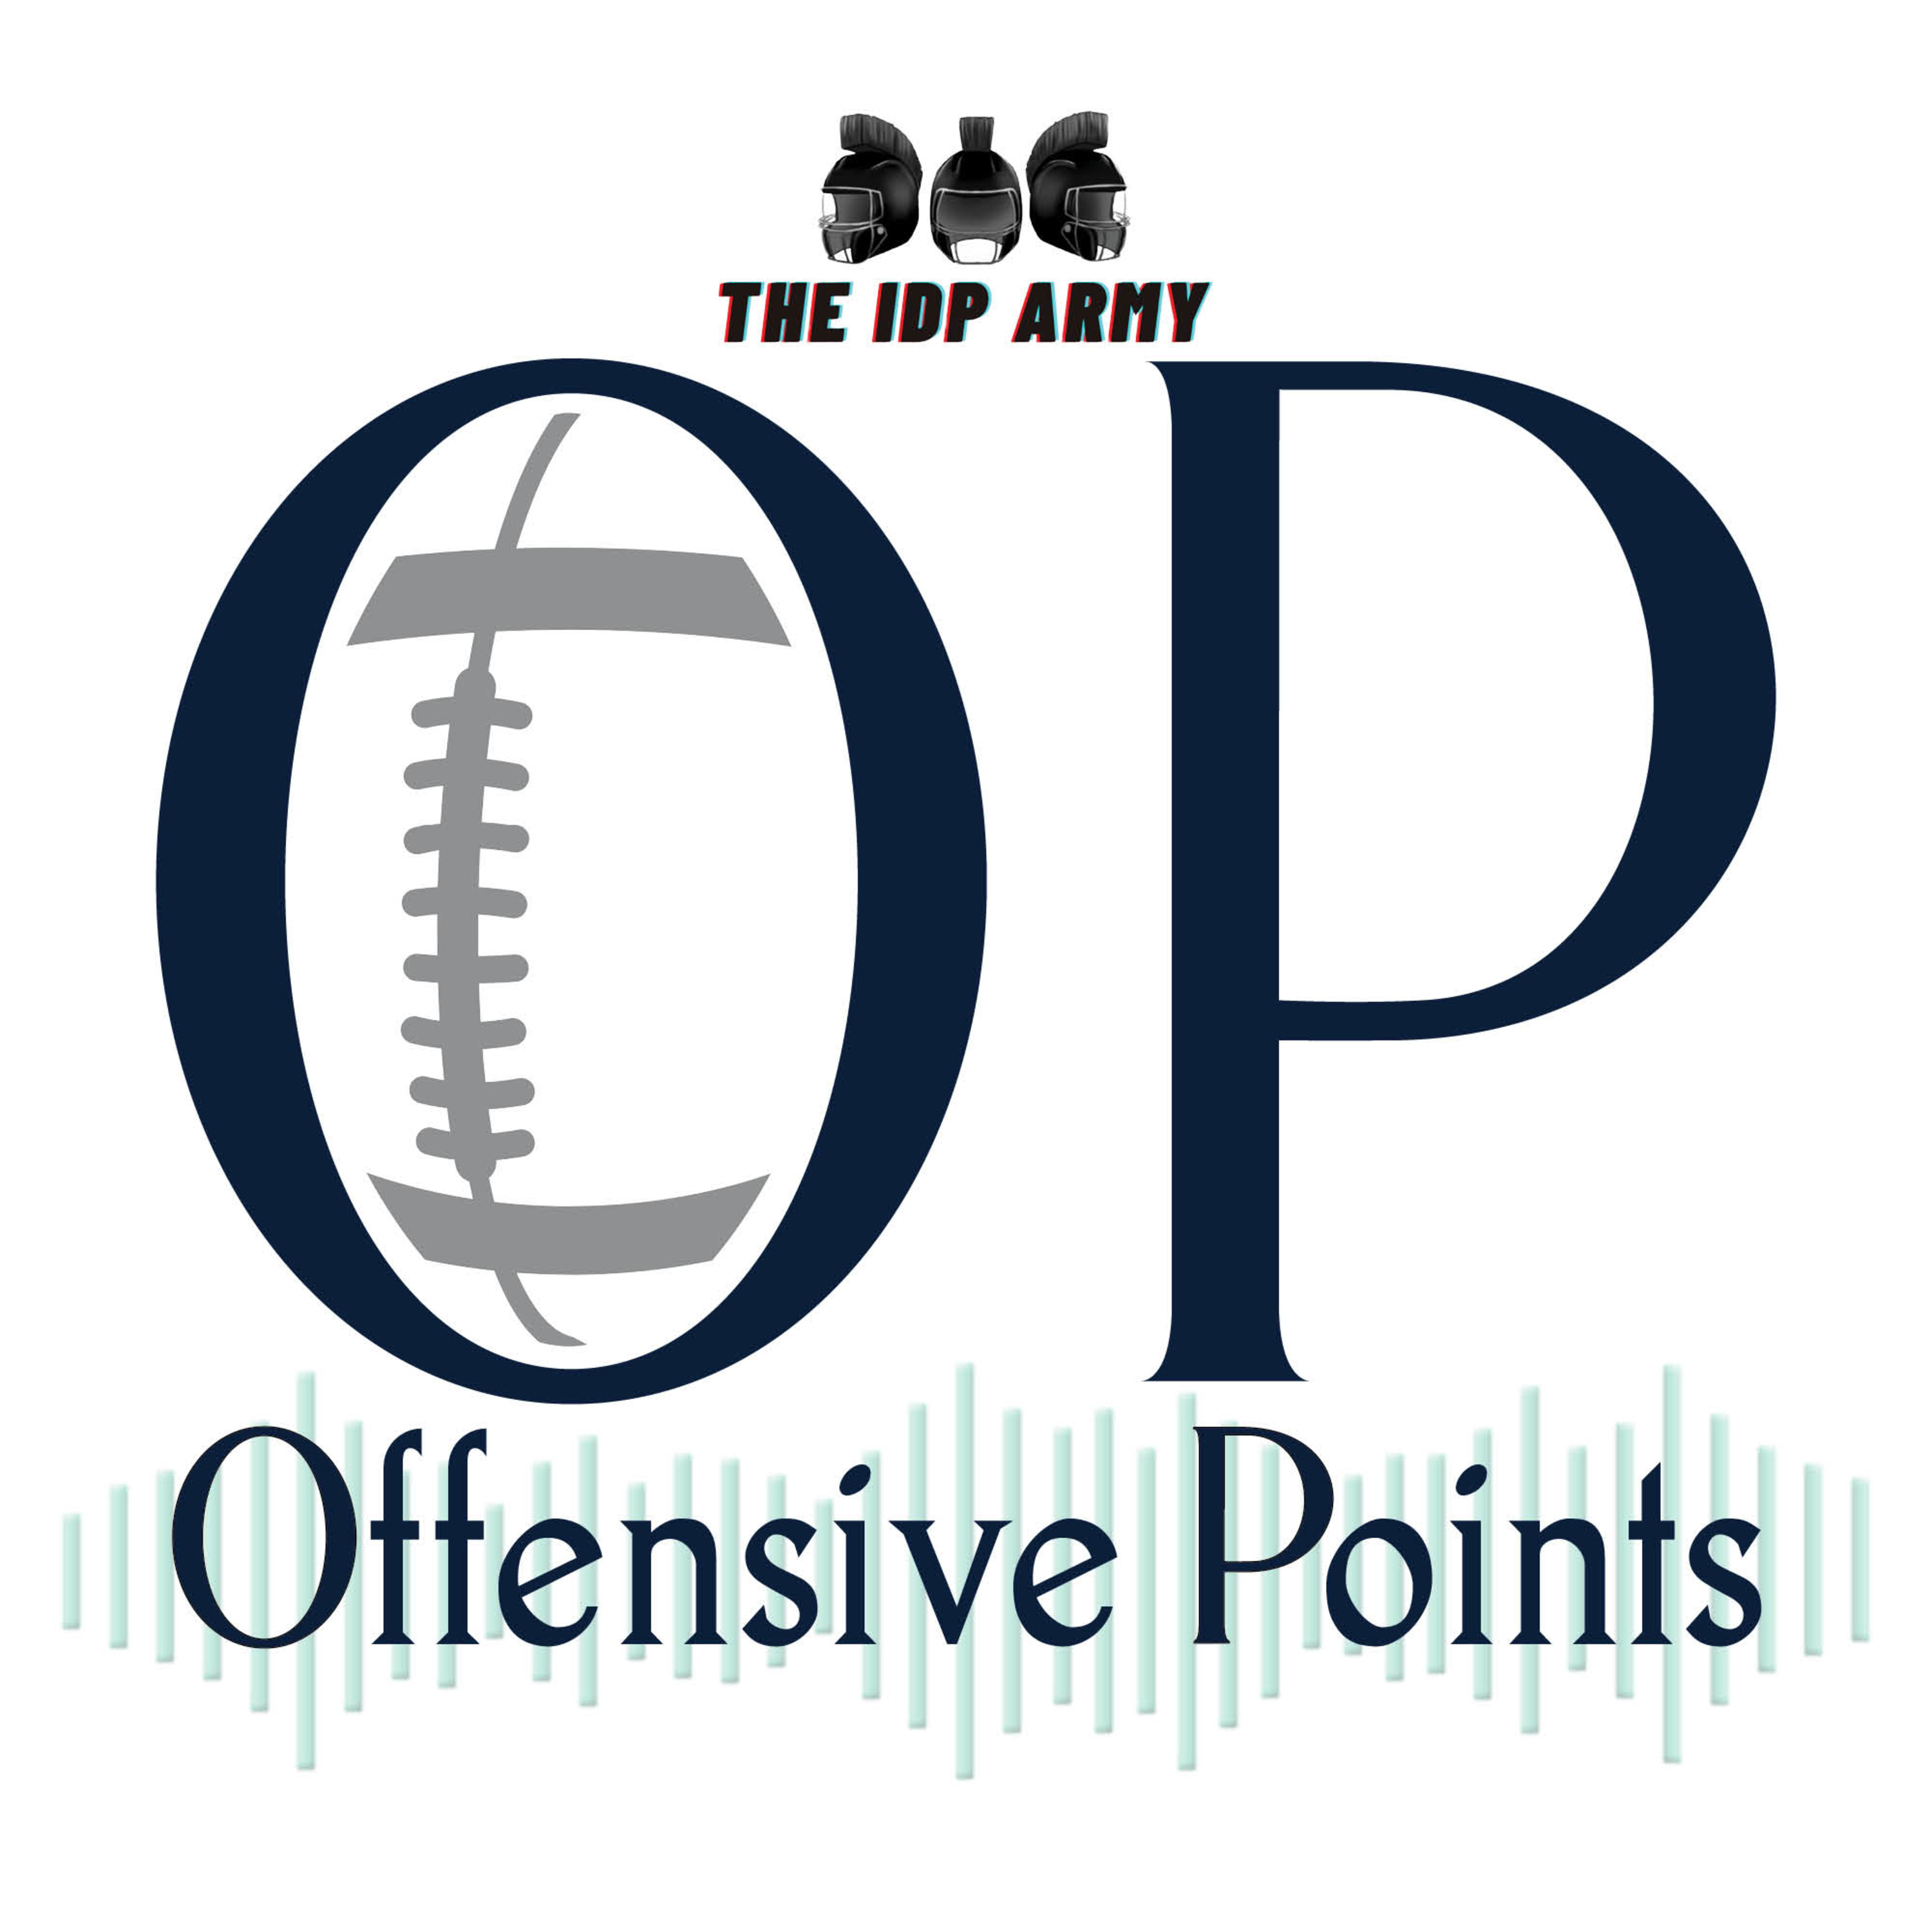 Offensive Points: The Post-It Note